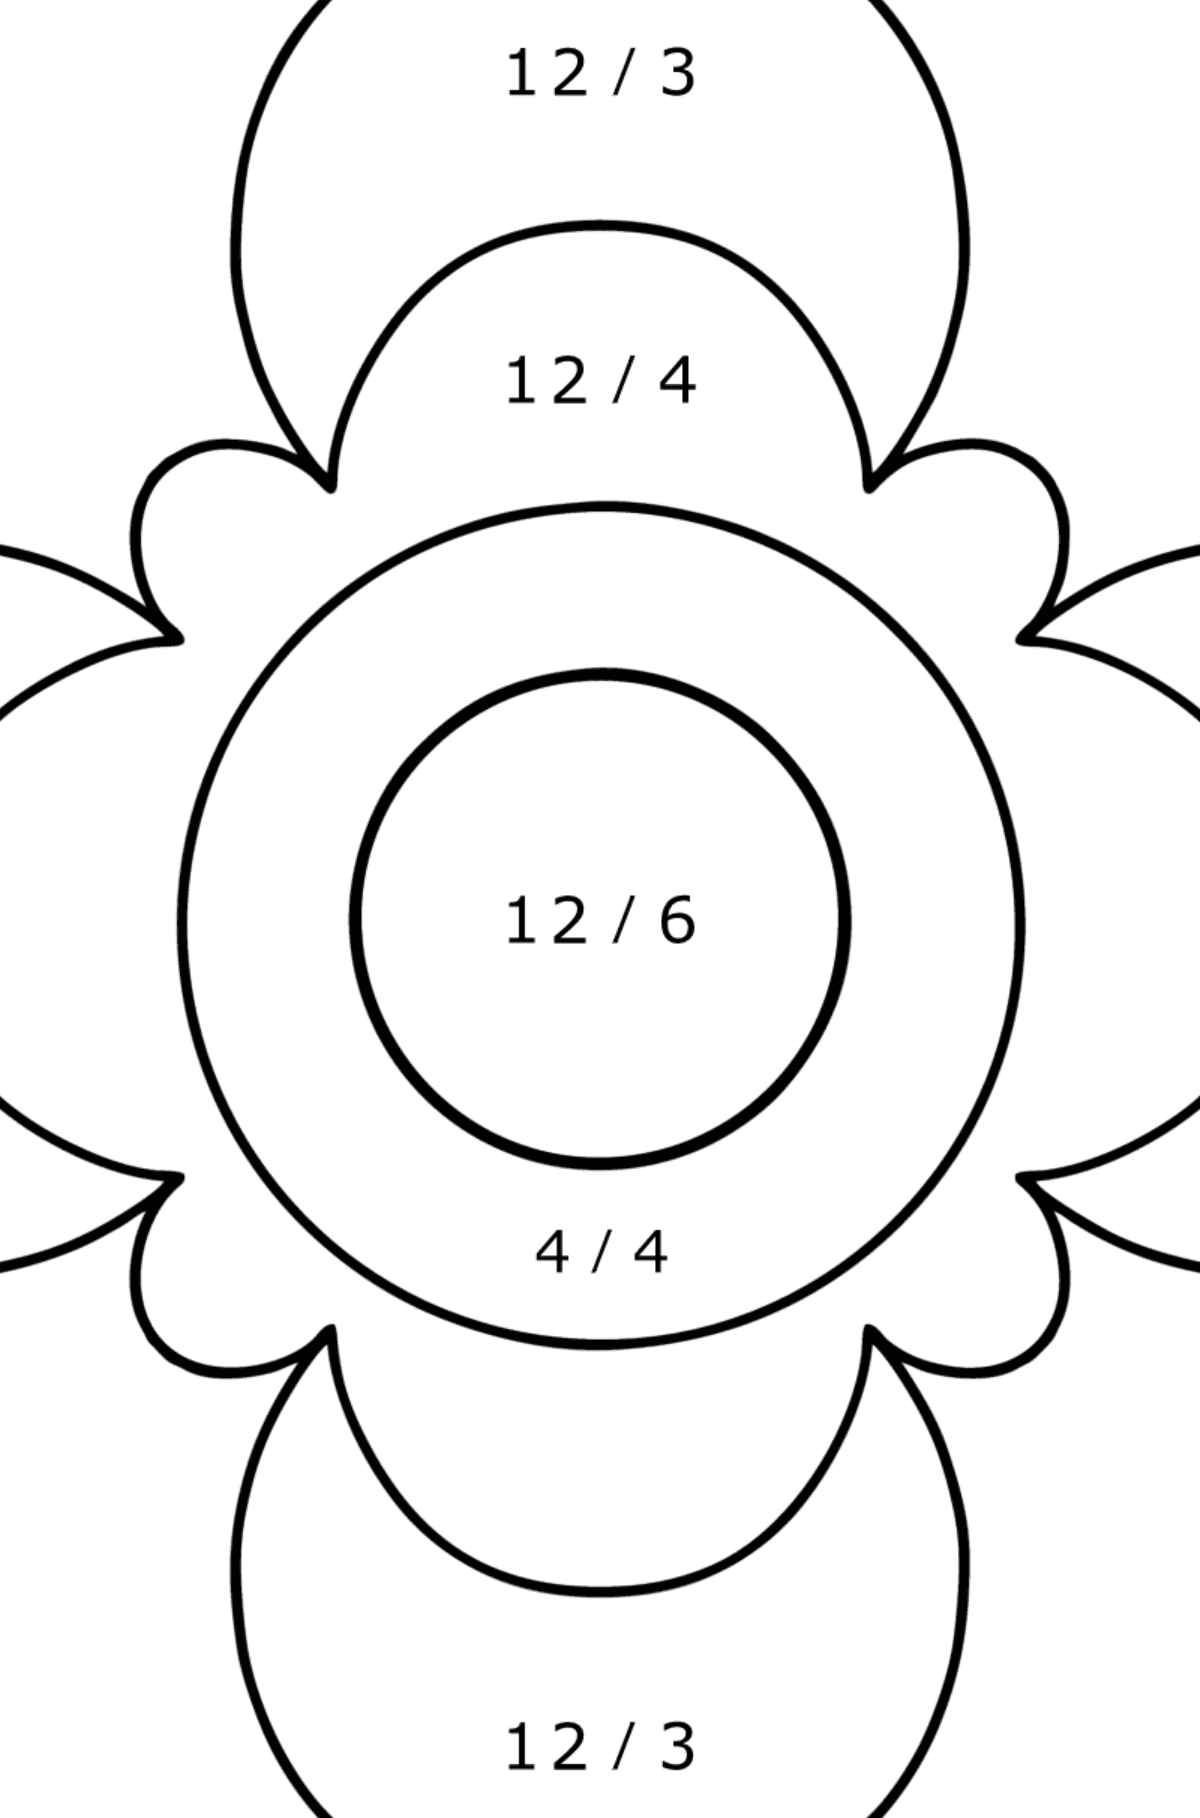 Coloring Anti stress flower for kids - Math Coloring - Division for Kids